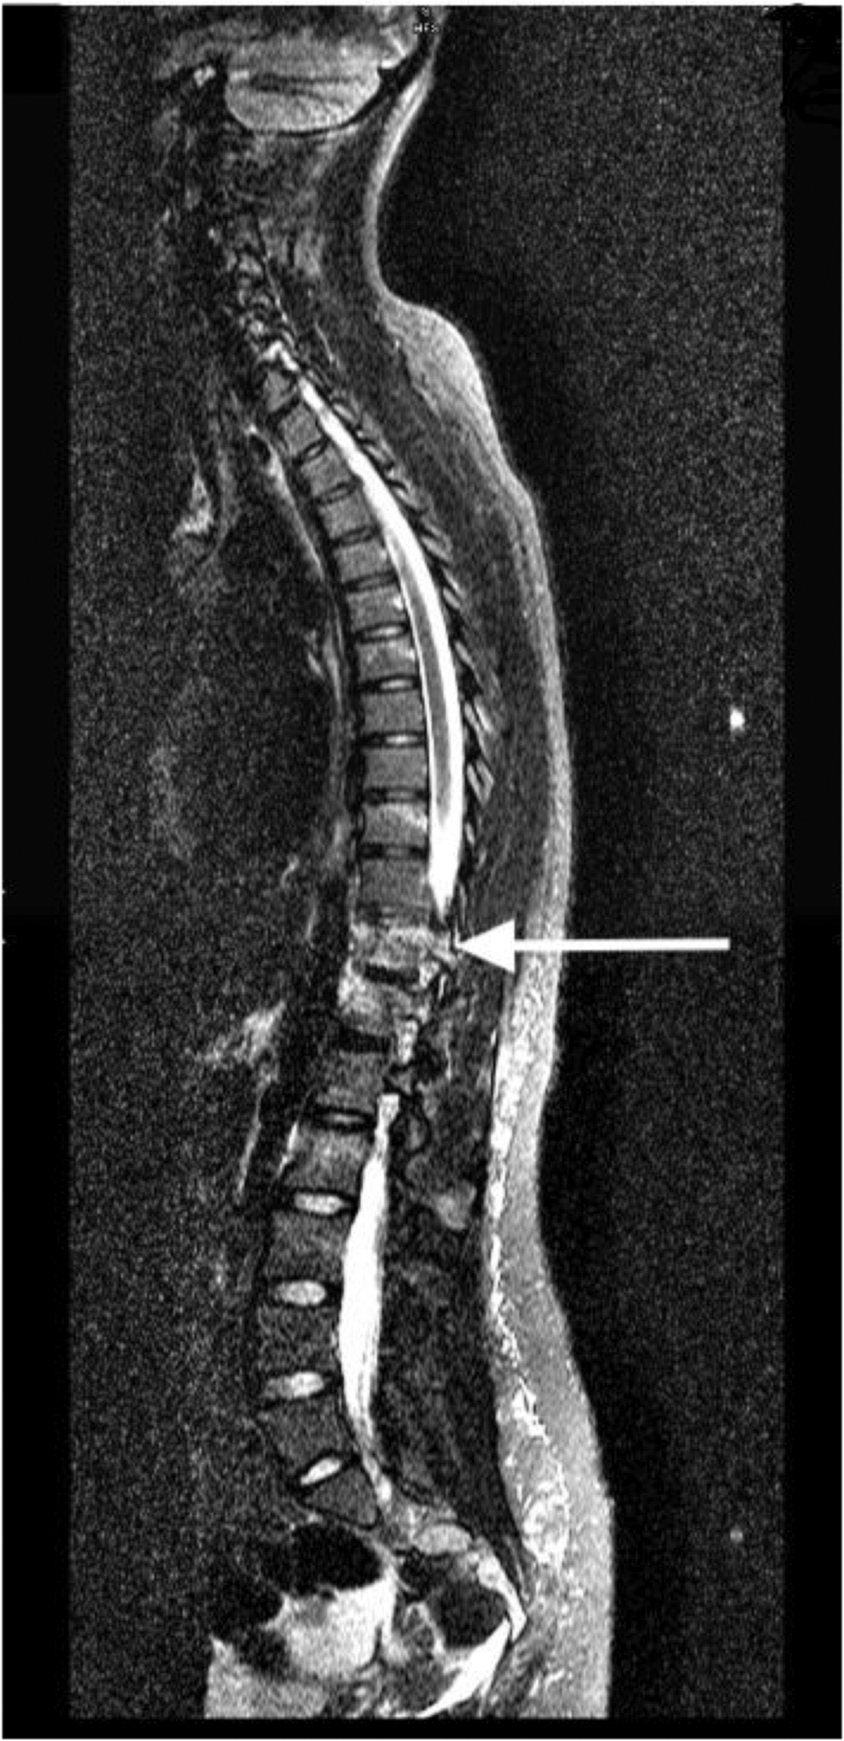 Dual spinal cord injury: a case of acute traumatic T9 AIS A spinal cord  injury complicated by transverse myelitis | Spinal Cord Series and Cases